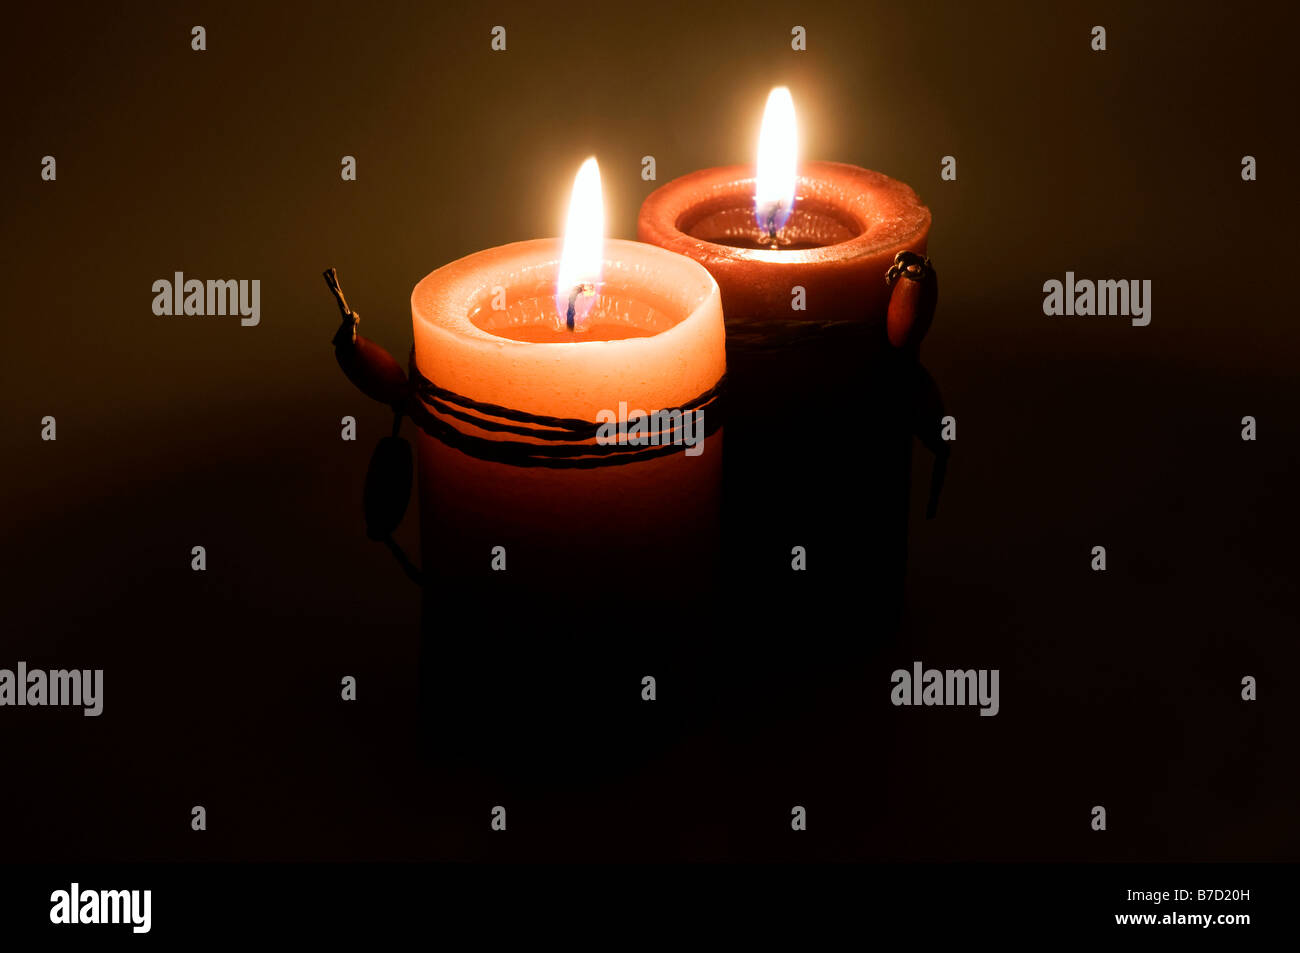 Red candles on a dark background Stock Photo